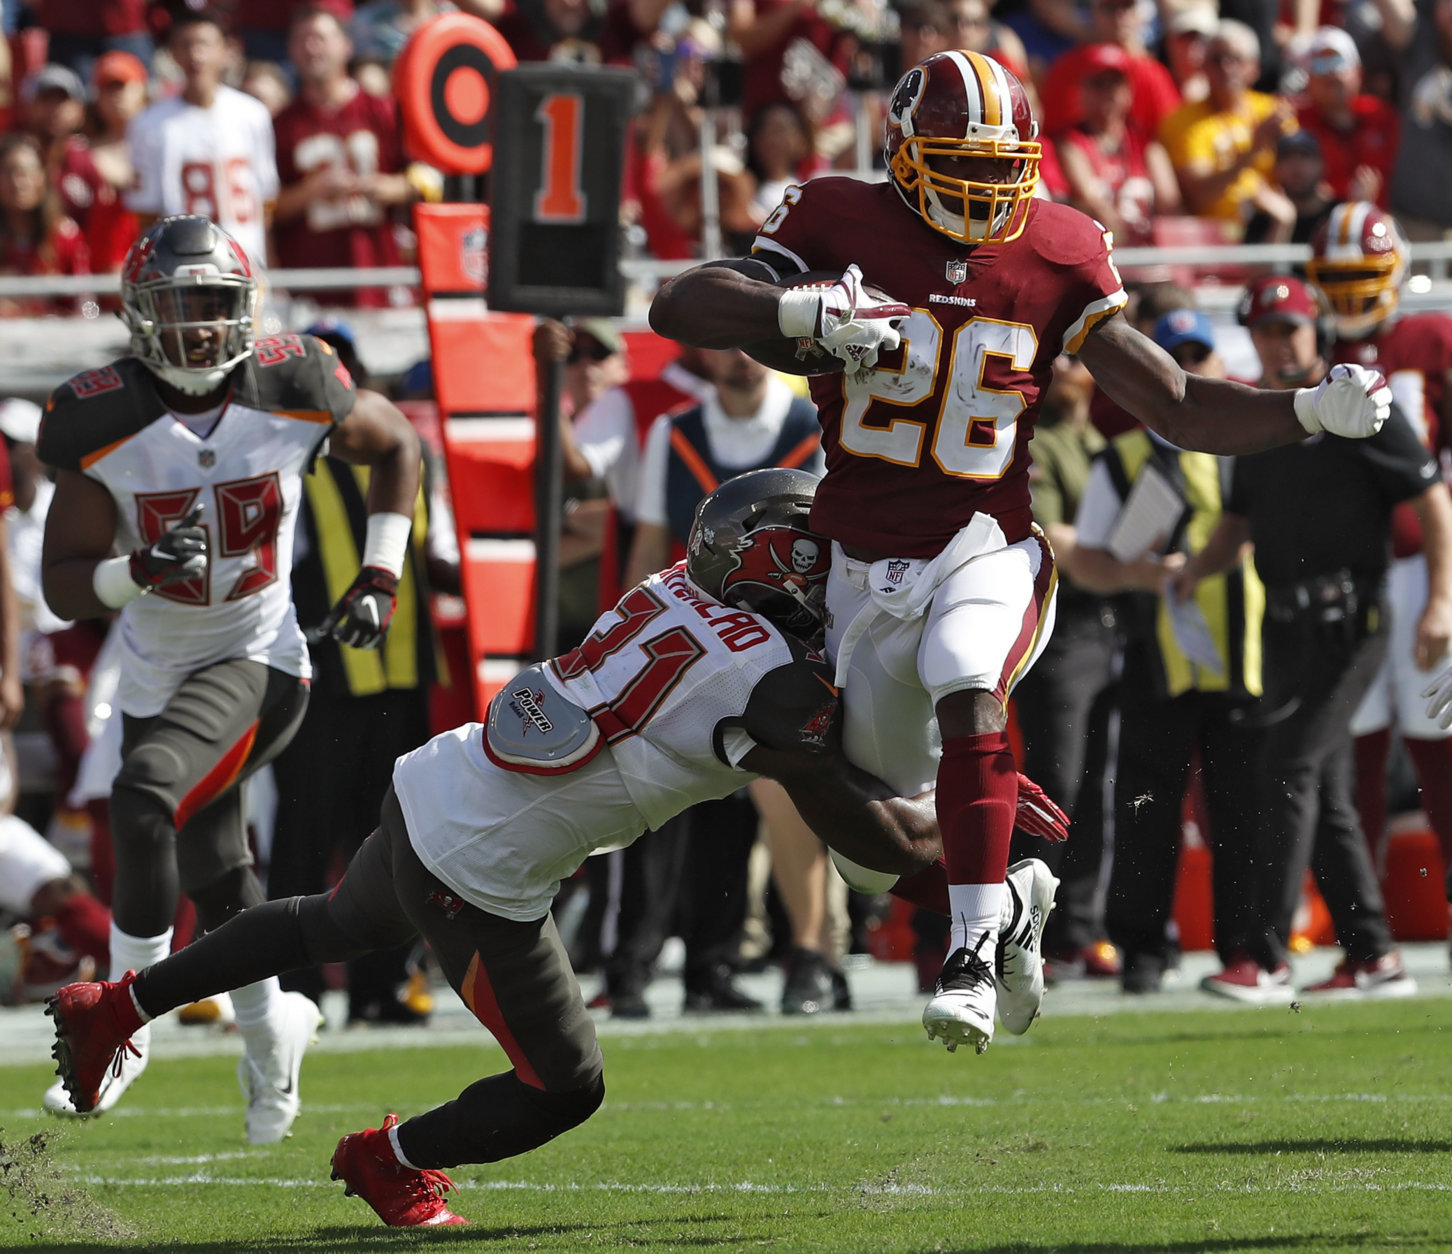 Washington Redskins running back Adrian Peterson (26) eludes a tackle by Tampa Bay Buccaneers free safety Jordan Whitehead (31) during the first half of an NFL football game Sunday, Nov. 11, 2018, in Tampa, Fla. (AP Photo/Mark LoMoglio)